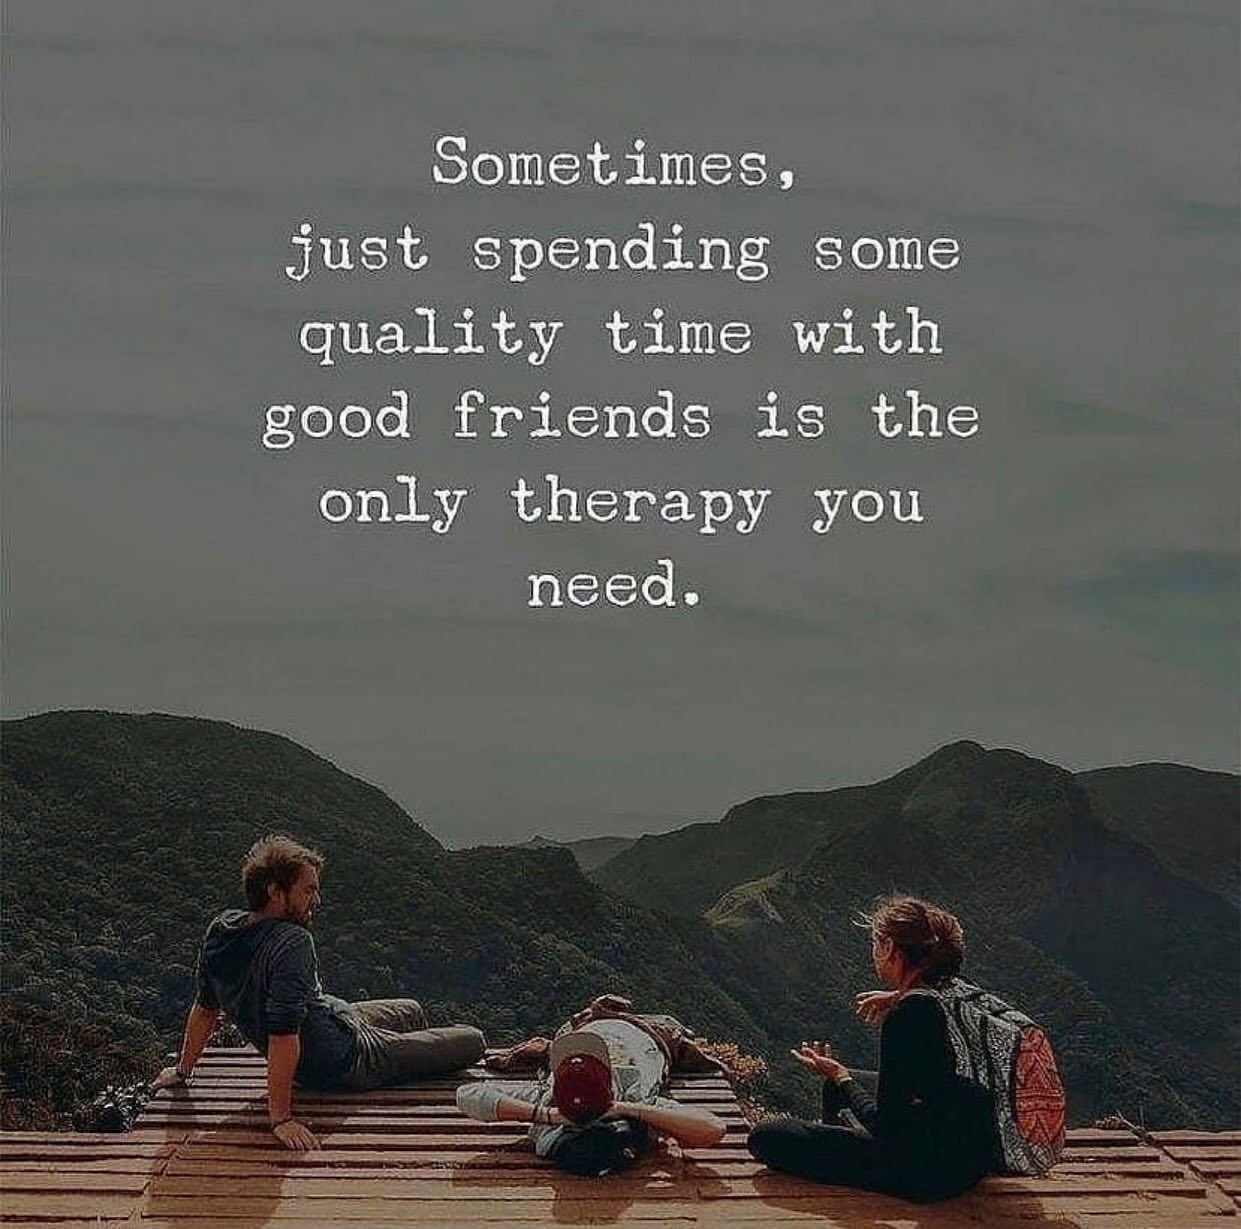 Sometimes, just spending some quality time with good friends is the only therapy you need.